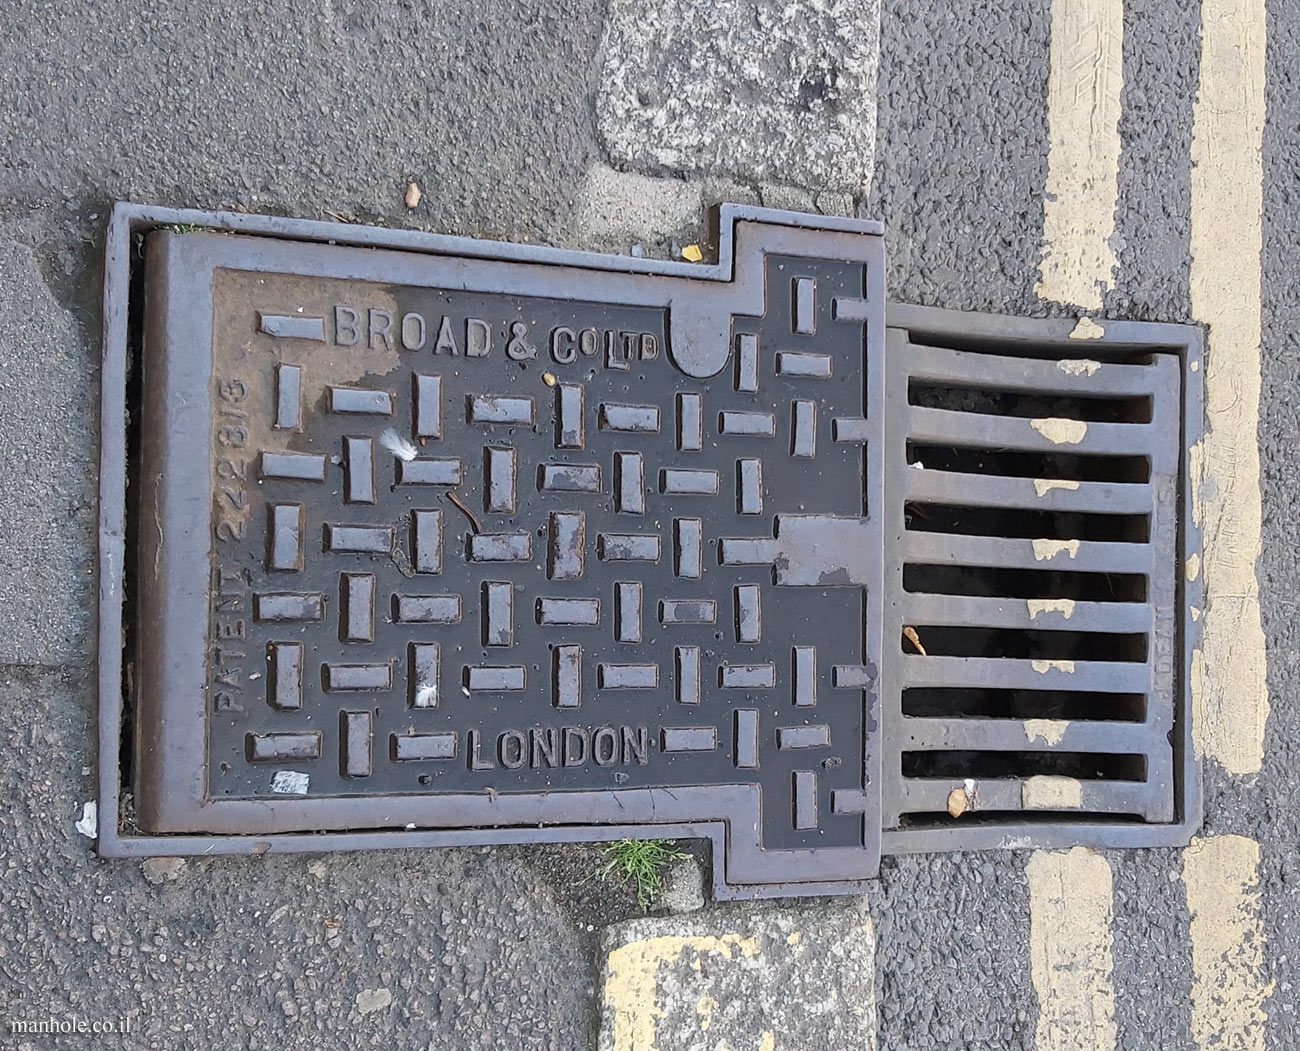 Oxford - Pavement drainage with a specially shaped upper part